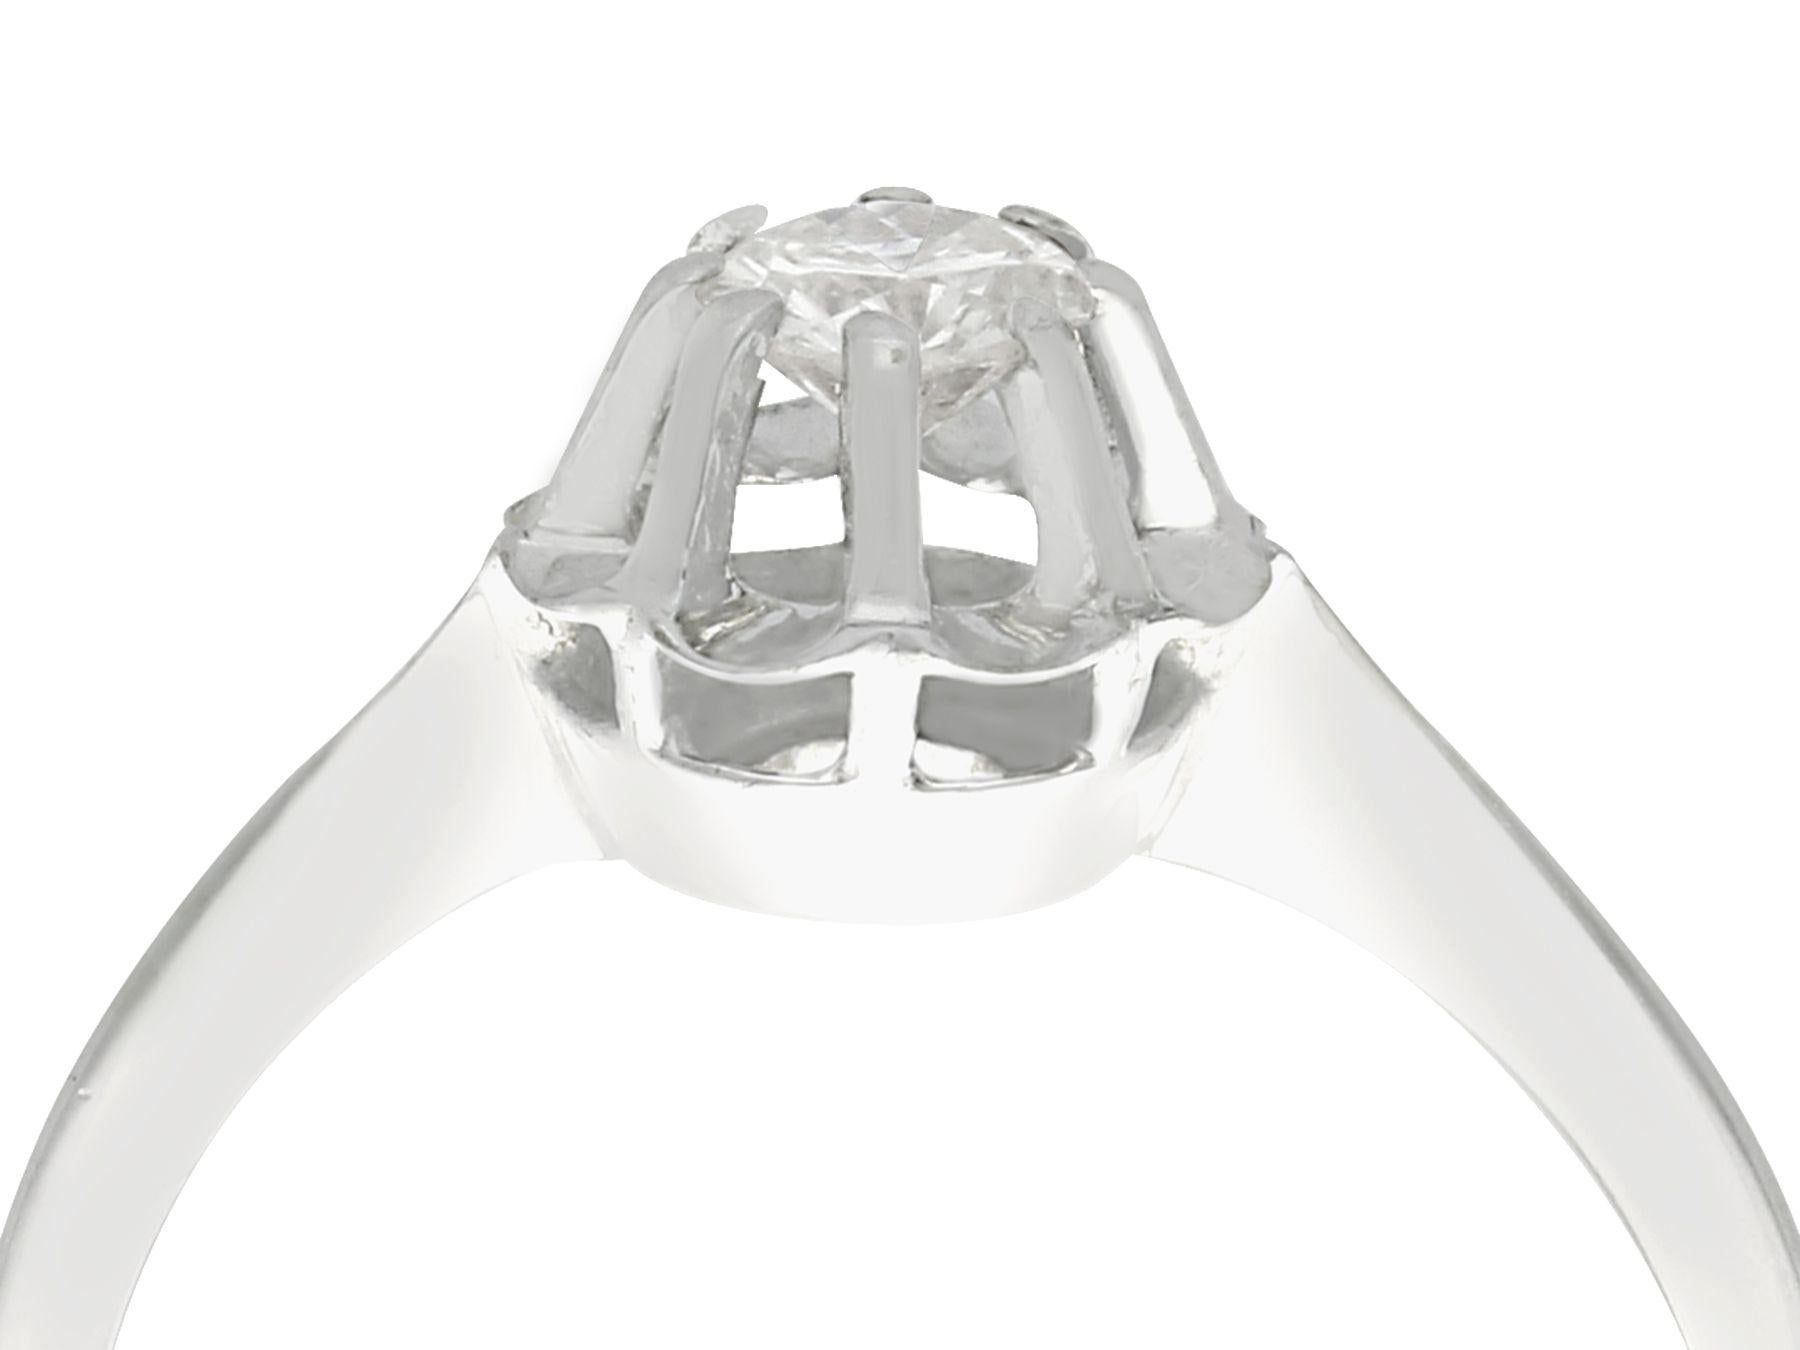 A fine and impressive 0.33 carat diamond and 18 karat white gold solitaire ring; part of our diverse vintage jewelry and estate jewelry collections.

This fine and impressive vintage diamond solitaire ring has been crafted in 18k white gold.

The